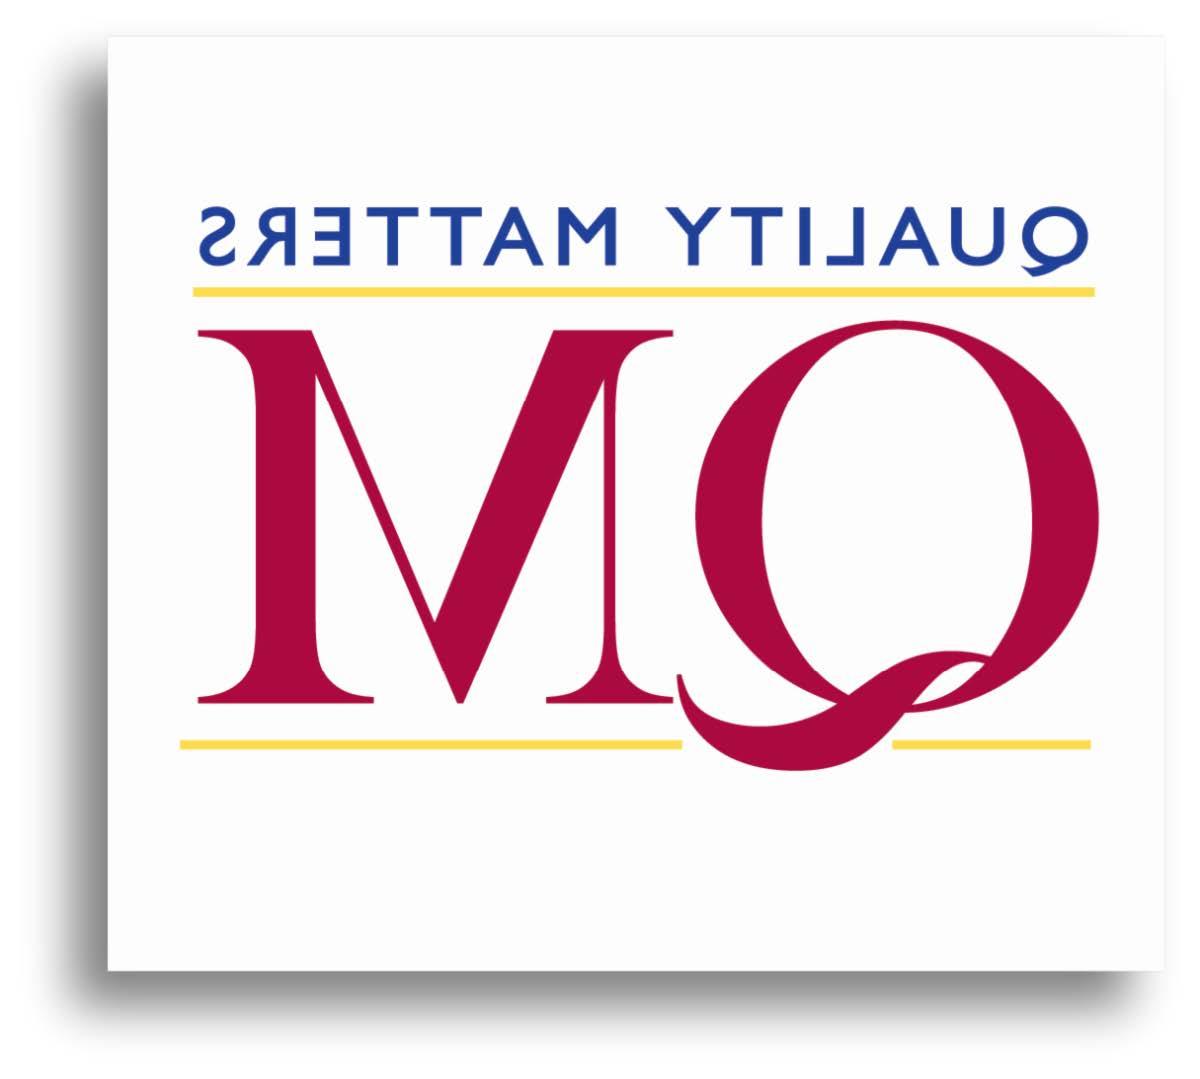 The Quality Matters logo composed of the the words Quality Matters in small, blue, capitalized san-serif font above a yellow horizontal line. The captialized letters Q and M are in red serif font centered on the logo between the two yellow horizontal lines.